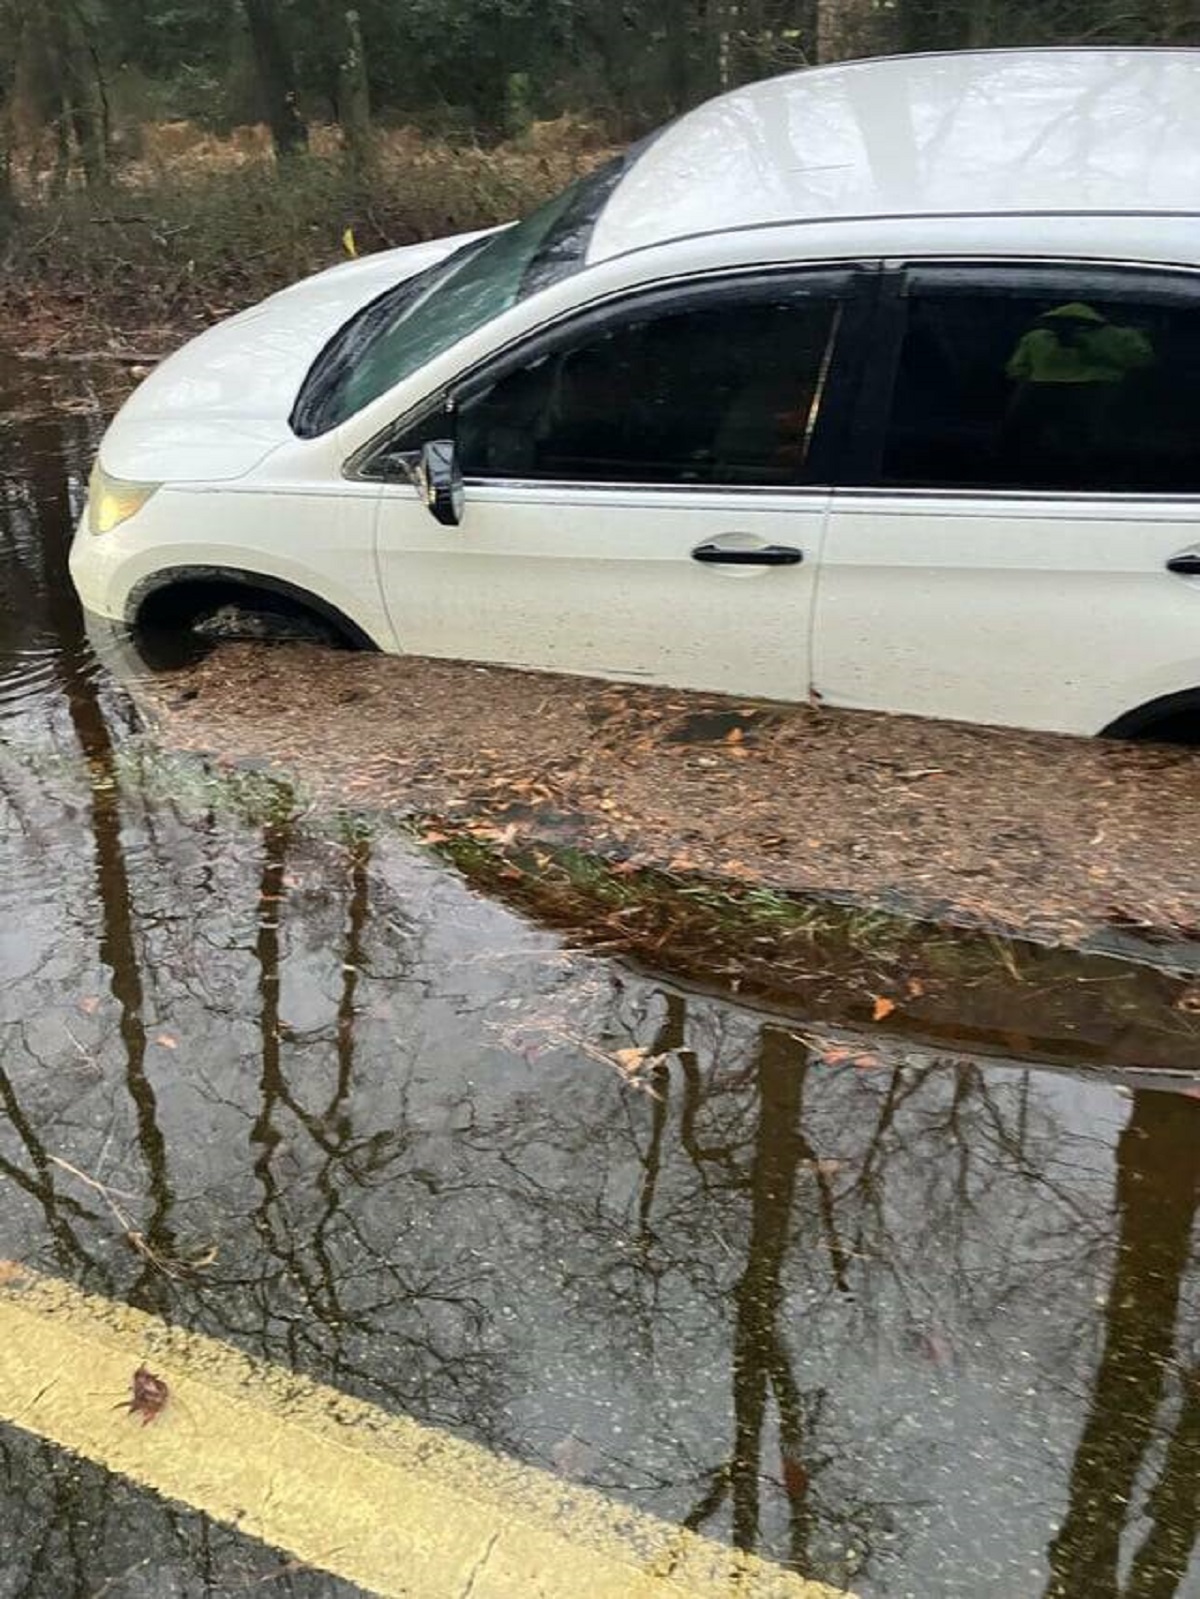 "I hydroplaned into a ditch on the way to work."